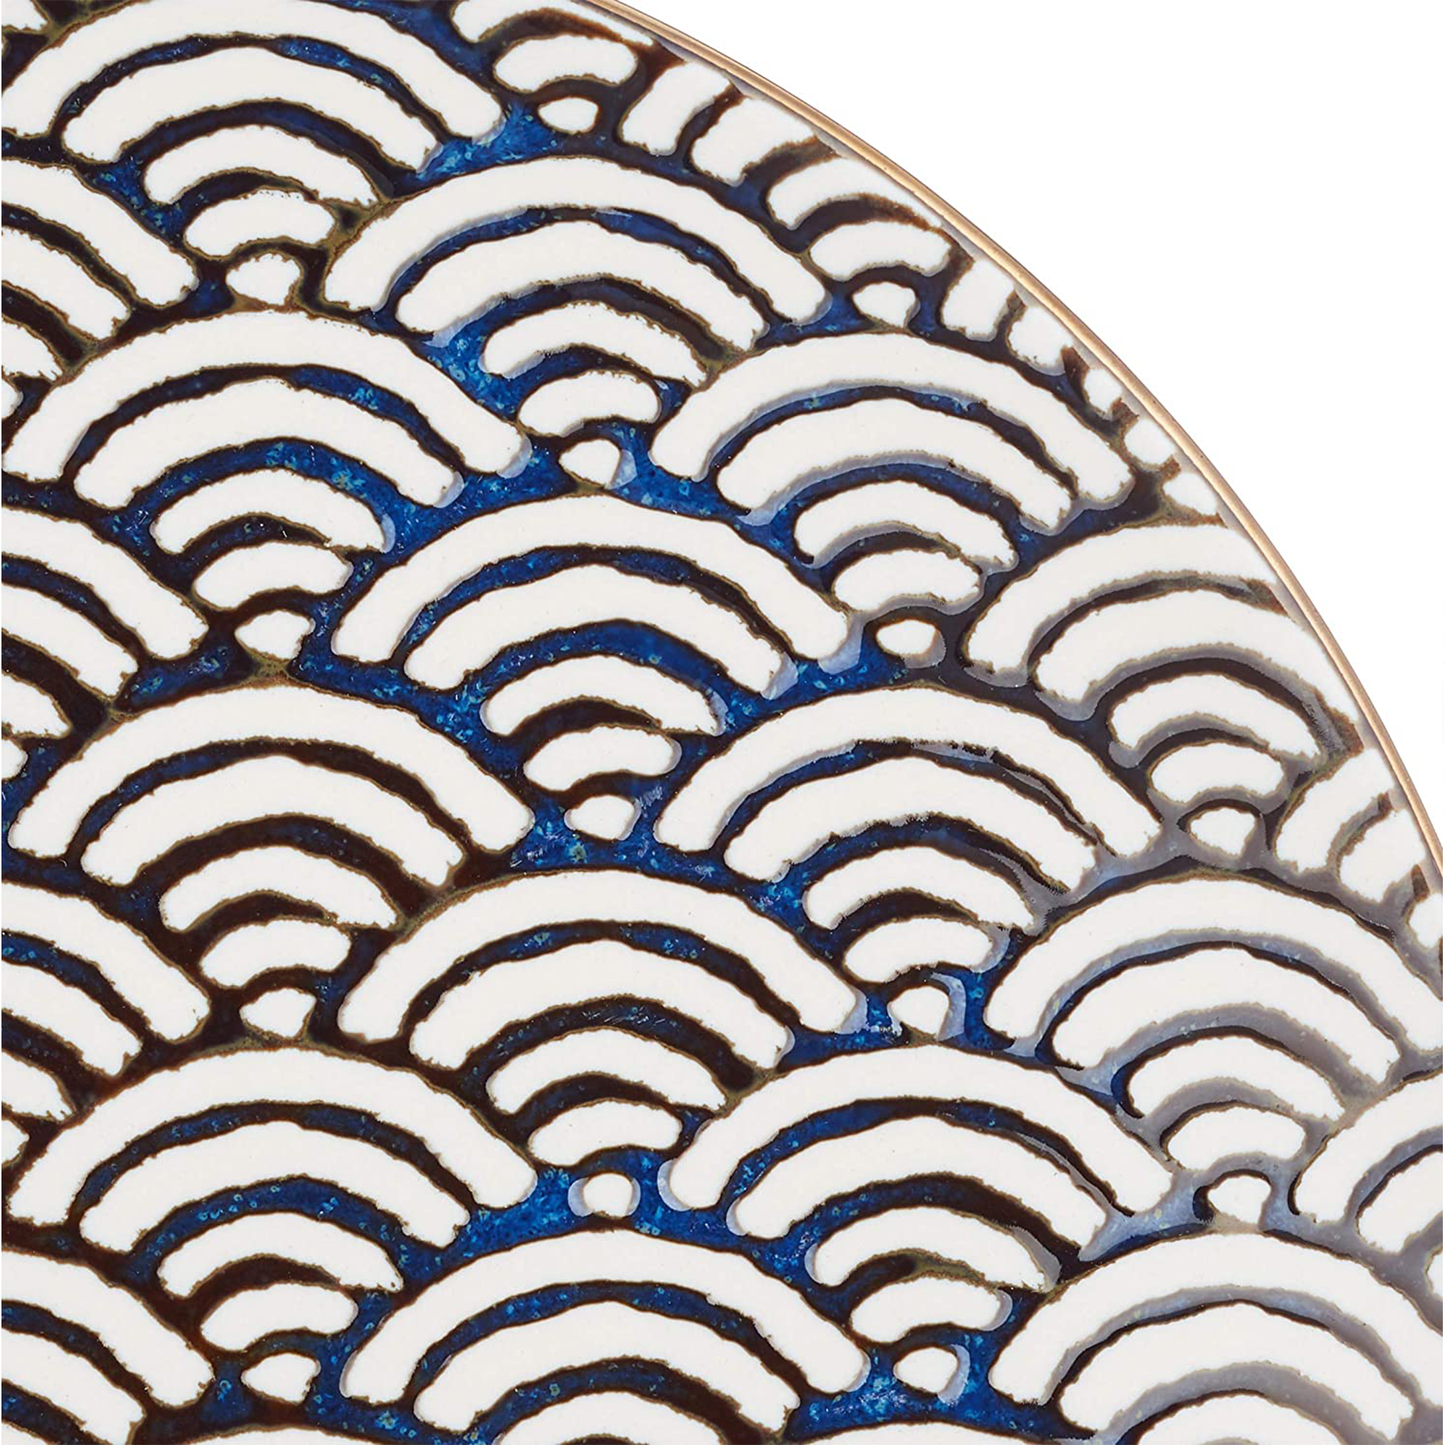 a close up of the blue and white wave pattern